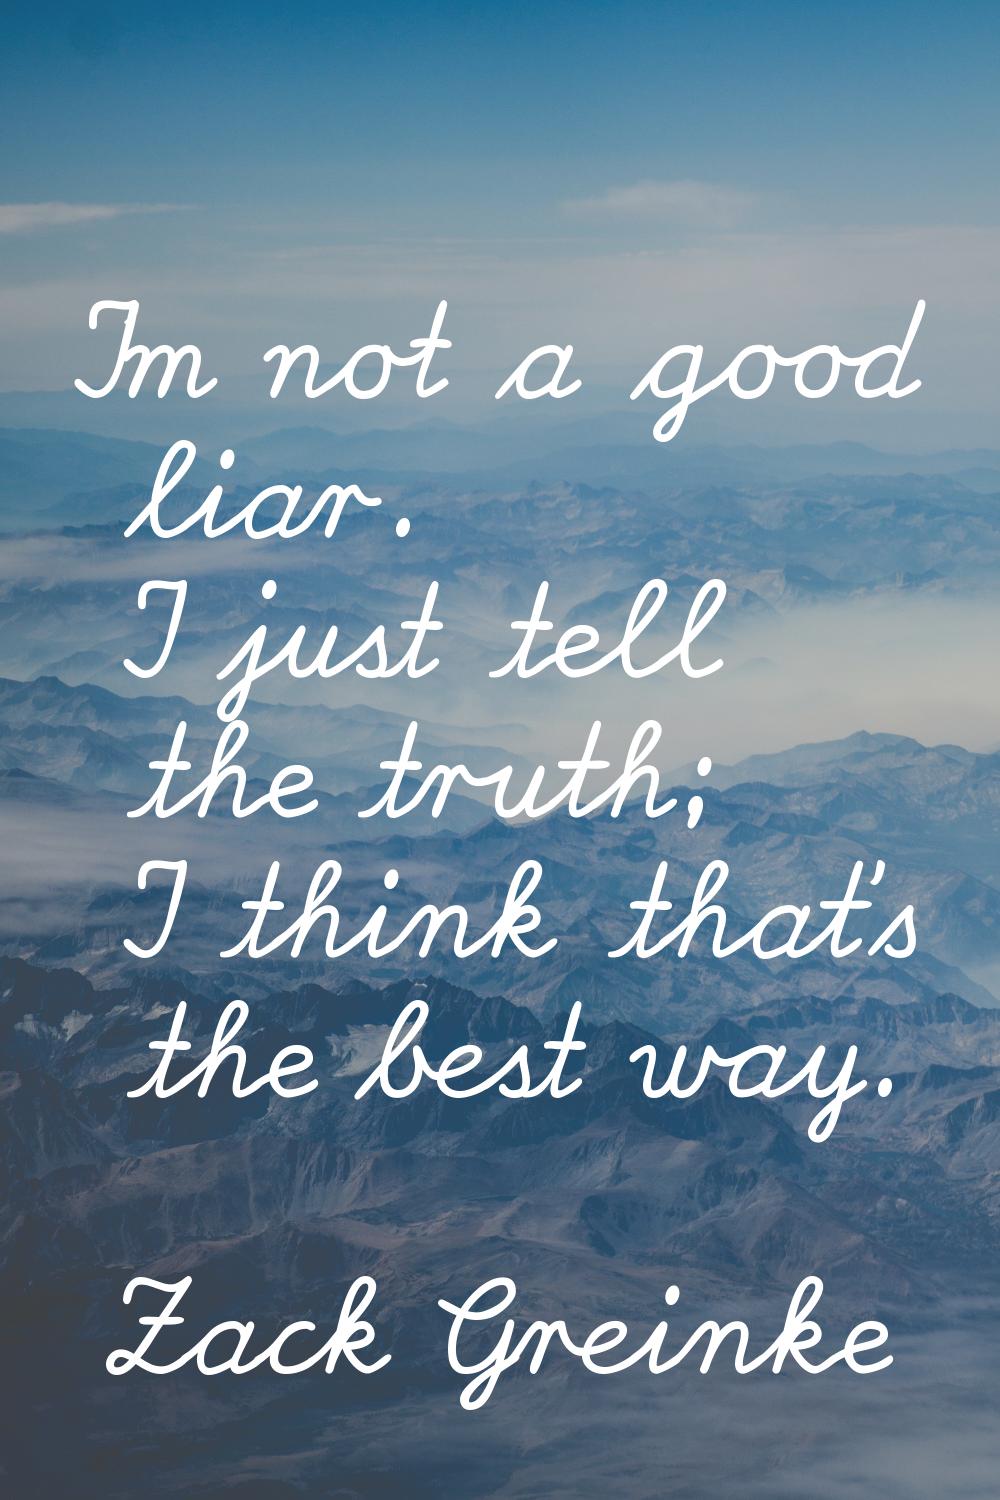 I'm not a good liar. I just tell the truth; I think that's the best way.